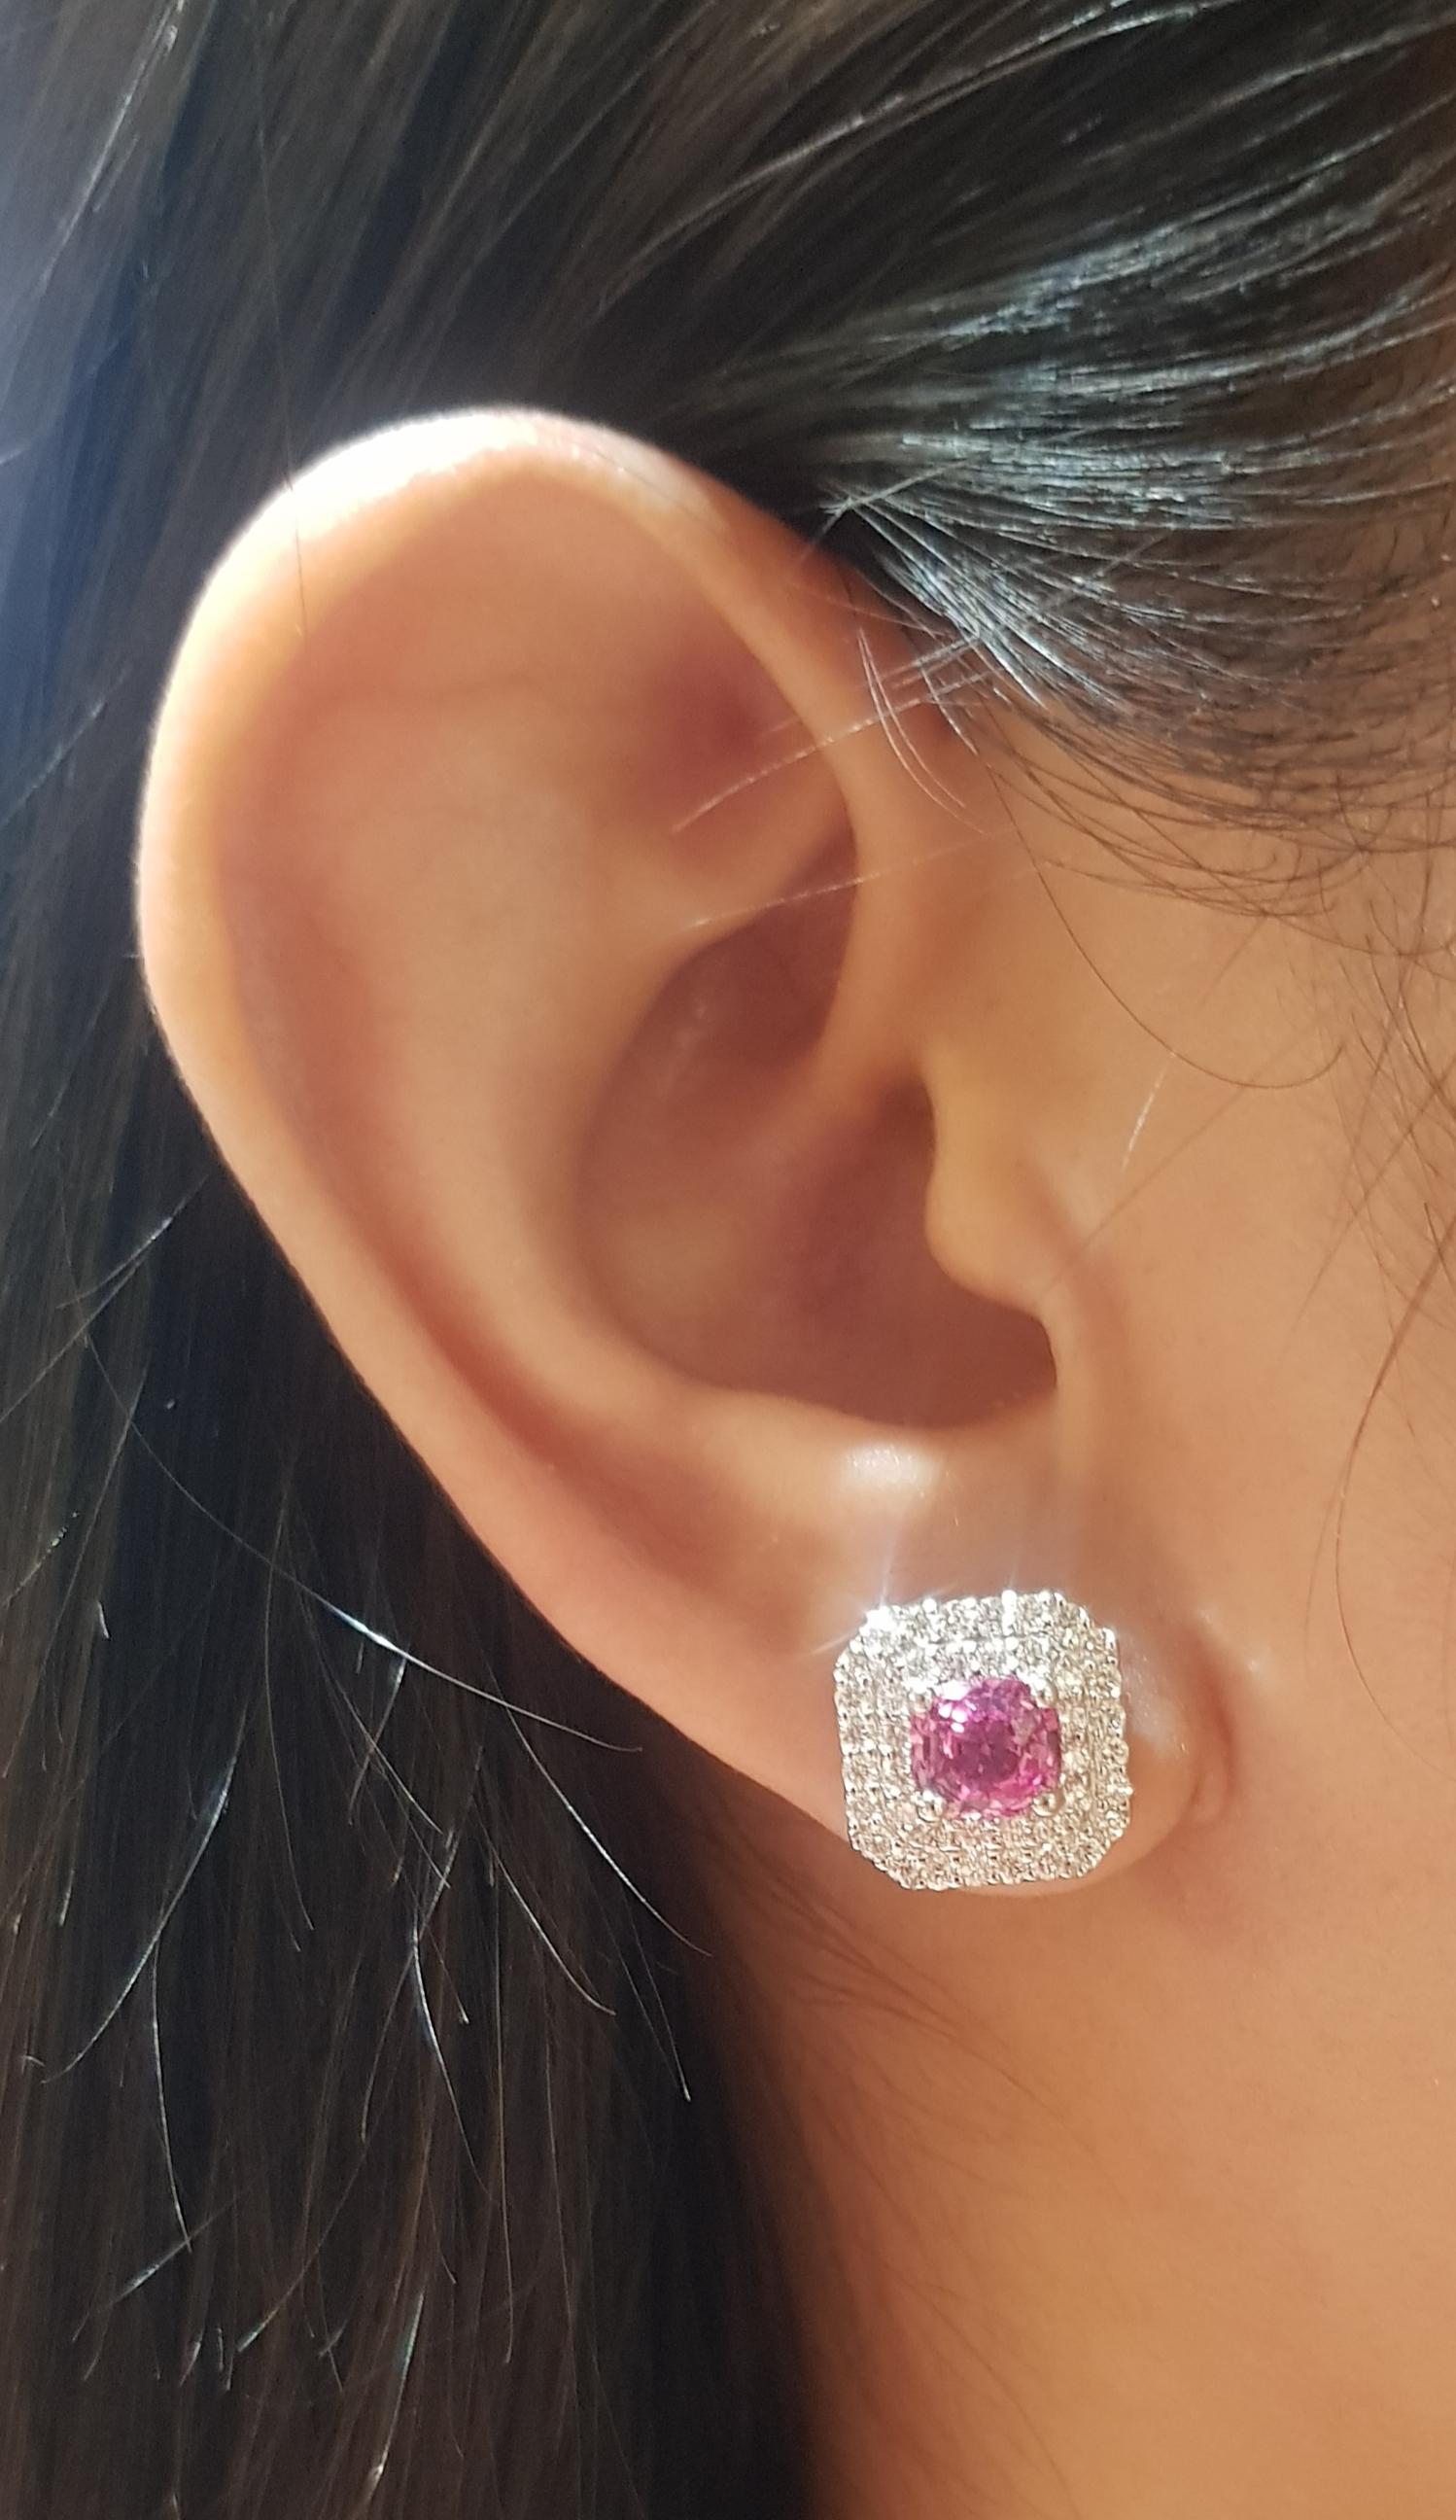 Padparadscha Sapphire 2.53 carats with Diamond 0.87 carat Earrings set in 18K White Gold Settings

Width: 1.2 cm 
Length: 1.2 cm
Total Weight: 8.90 grams

